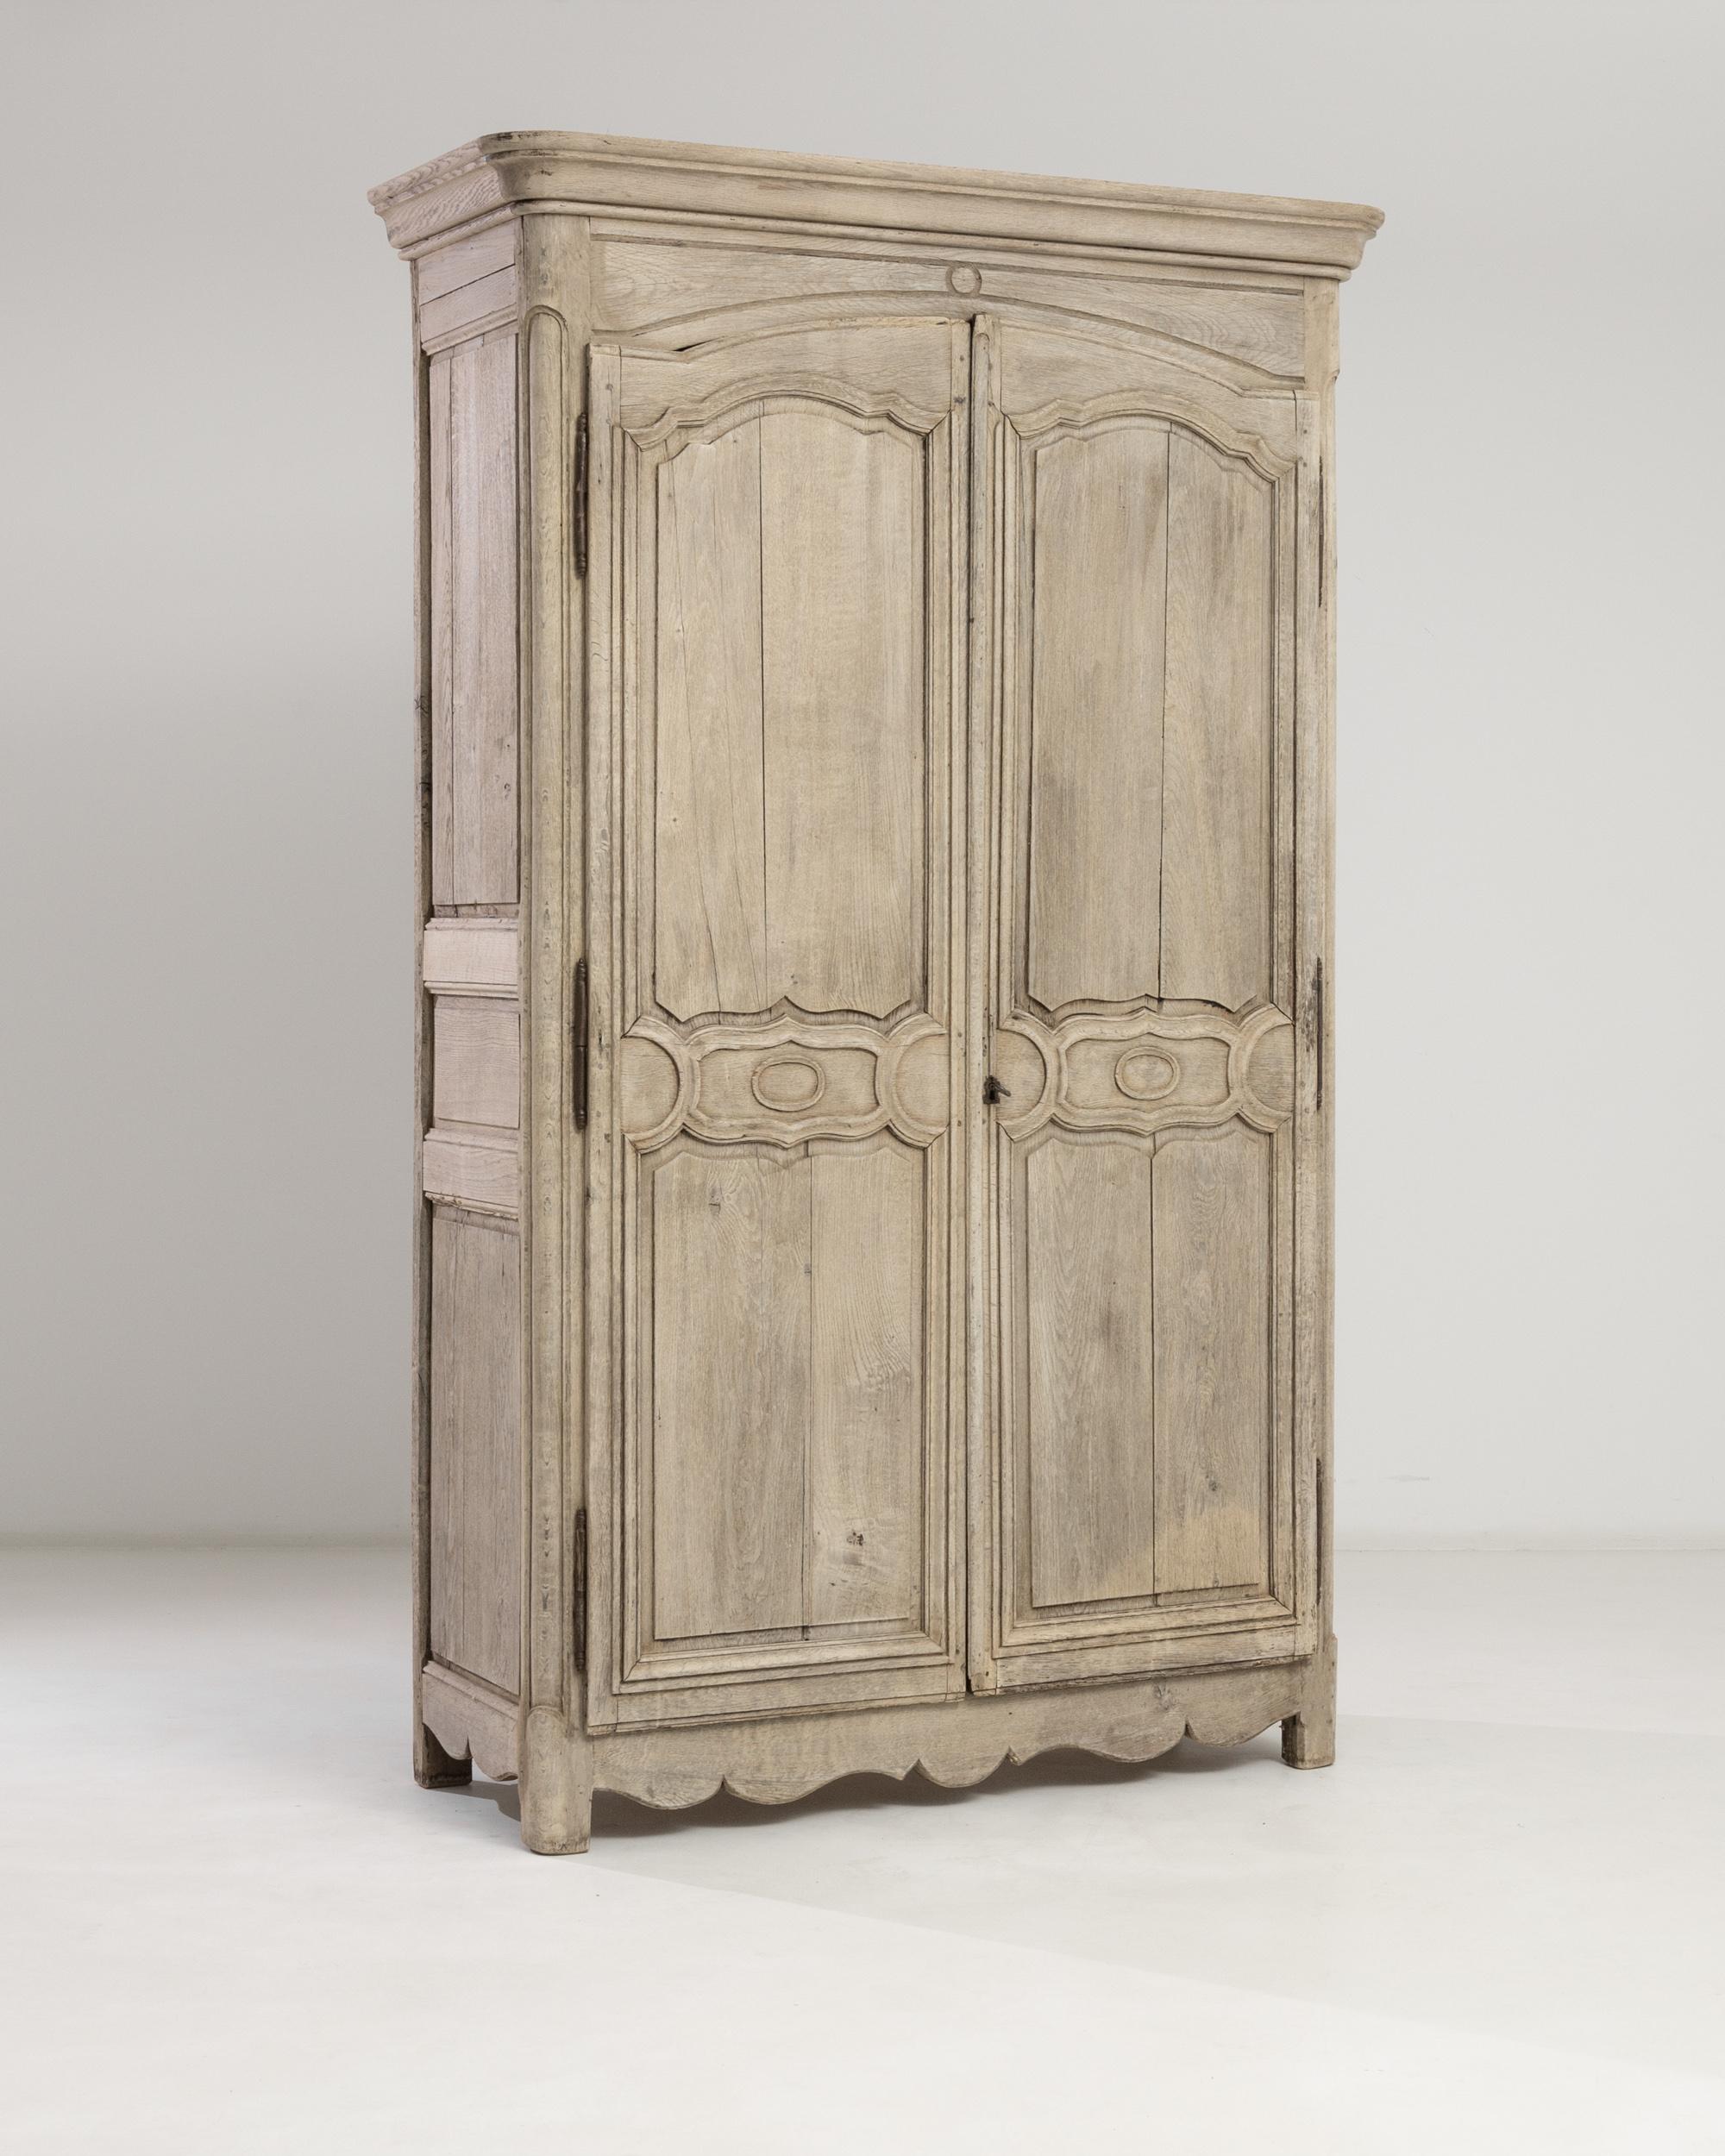 From the crown molding, the carved semicircular arch, to the bold neoclassical carvings of the raised doors and the scalloped skirt adorning the bottom — this majestic cabinet built in France circa 1830 presents a harmonious plexus of smooth